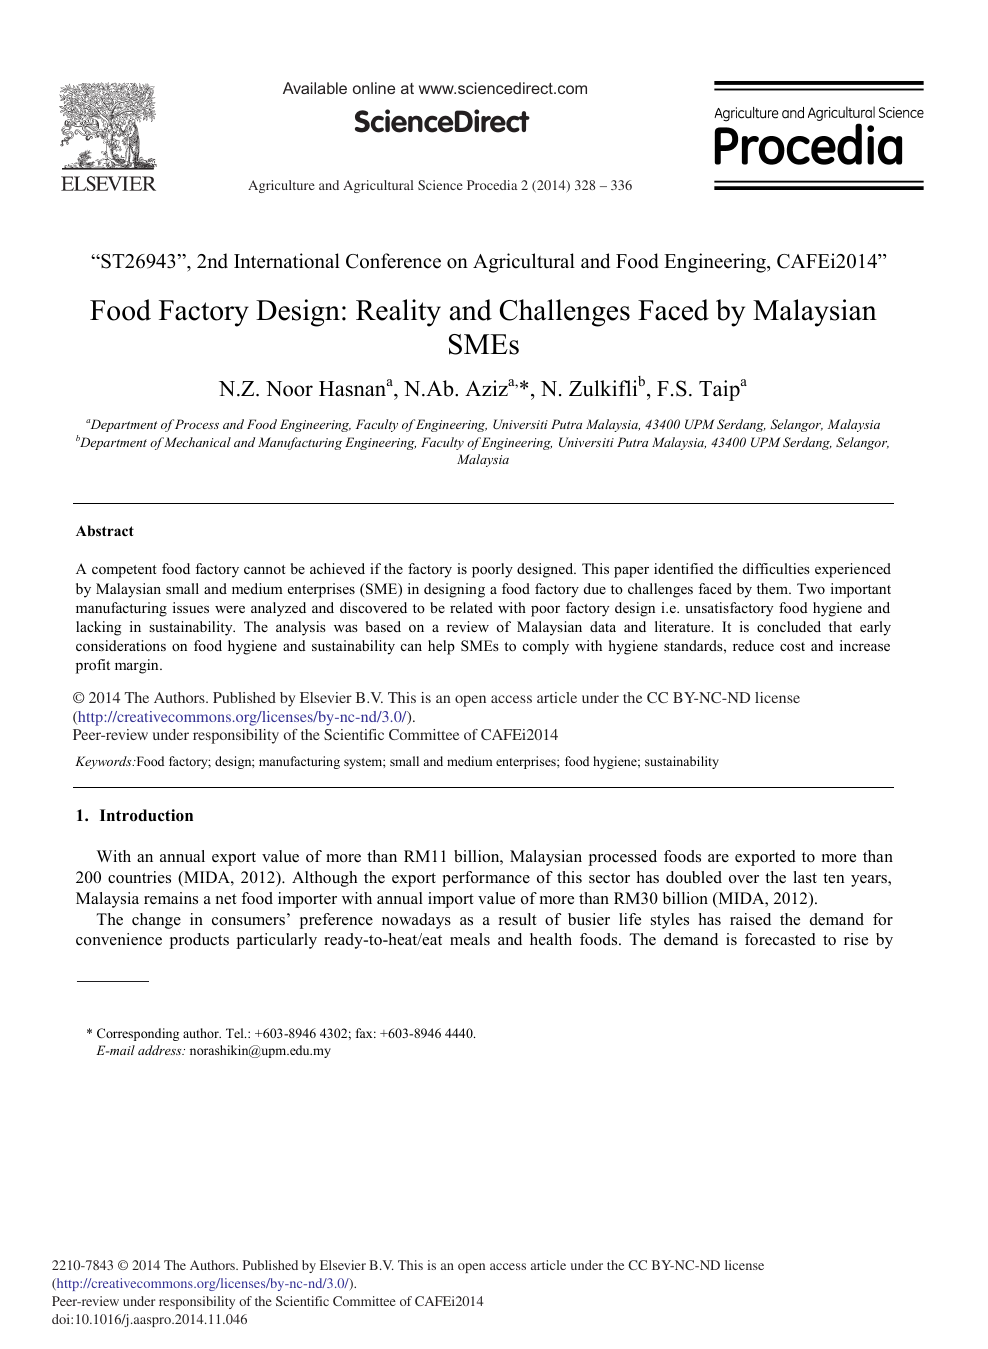 Food Factory Design Reality And Challenges Faced By Malaysian Smes Topic Of Research Paper In Agriculture Forestry And Fisheries Download Scholarly Article Pdf And Read For Free On Cyberleninka Open Science